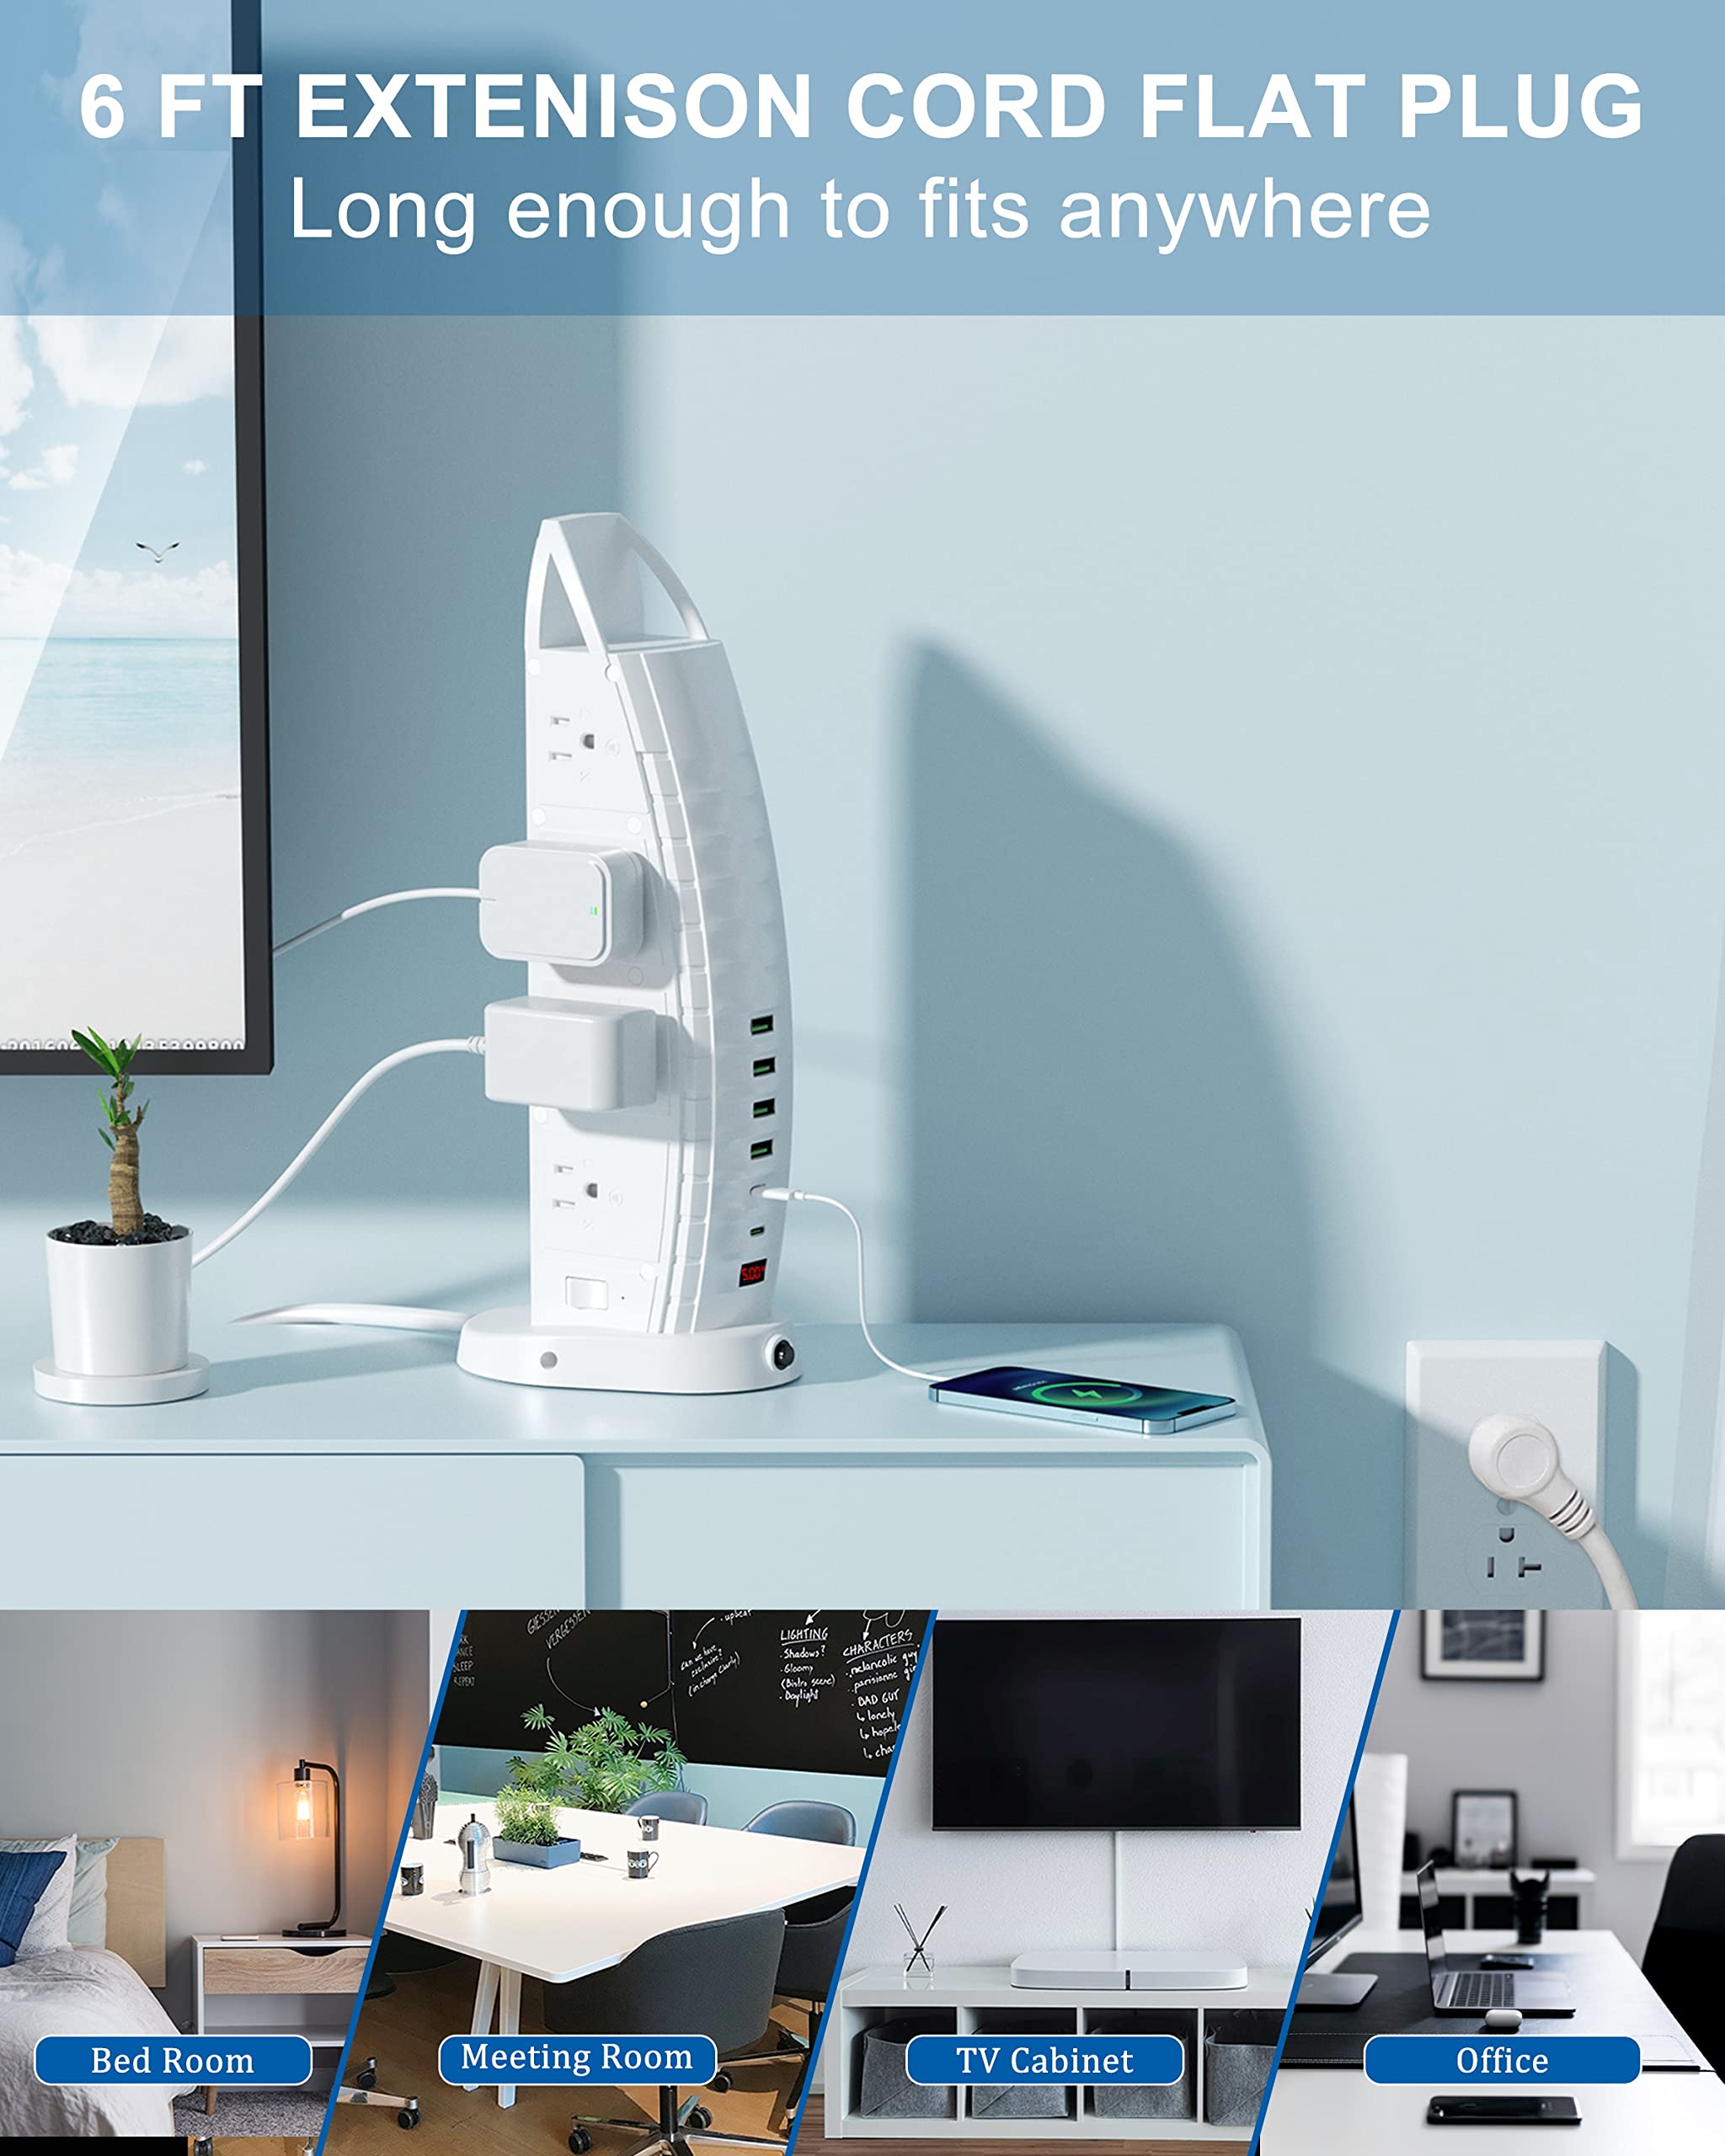 Power Strip Tower,Surge Protector Outlet 8 Widely Spaced AC Outlets,Fast Charger 4 USB Ports and 2 USB C with 6ft Extension Cord,Overload Protection with Voltage Display for Home Office